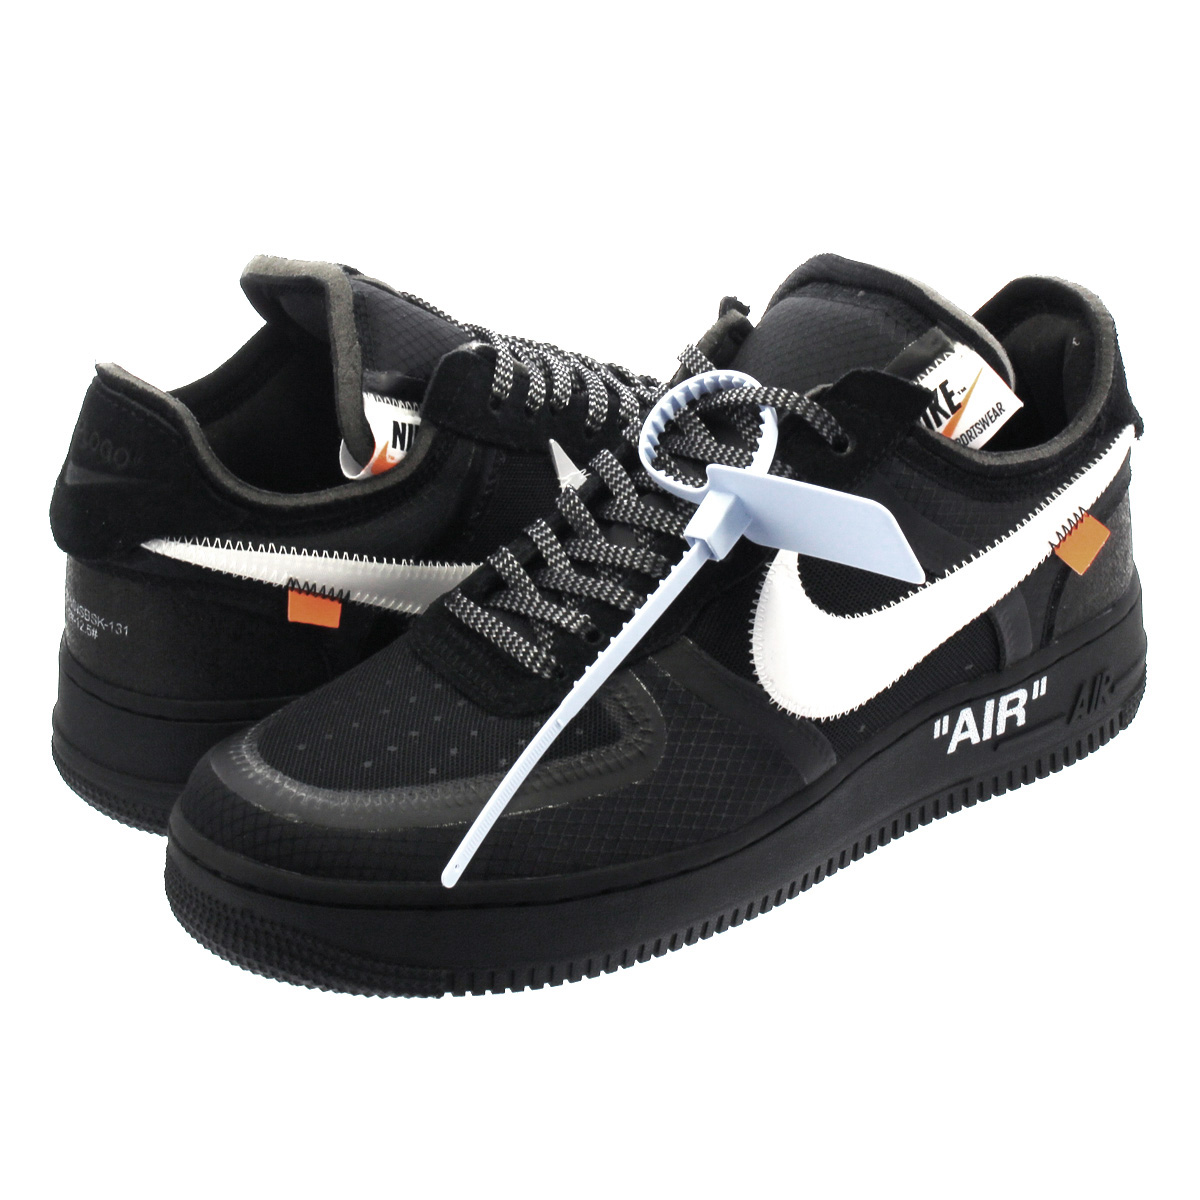 air force 1 low black off white